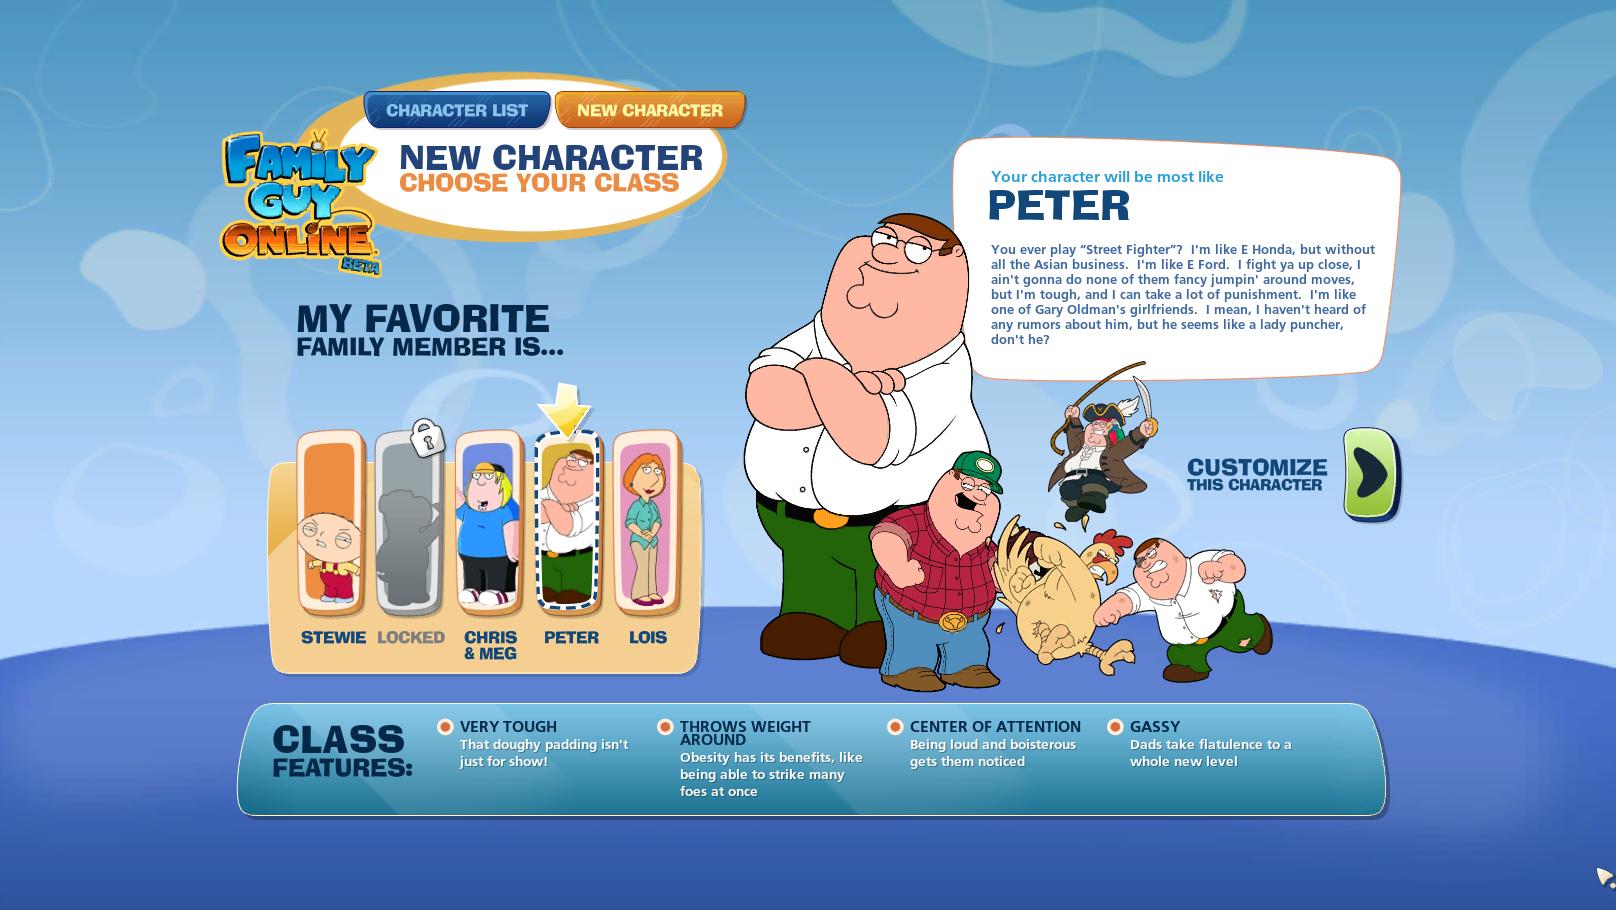 Family Guy Online open beta targeted for this year - GameSpot